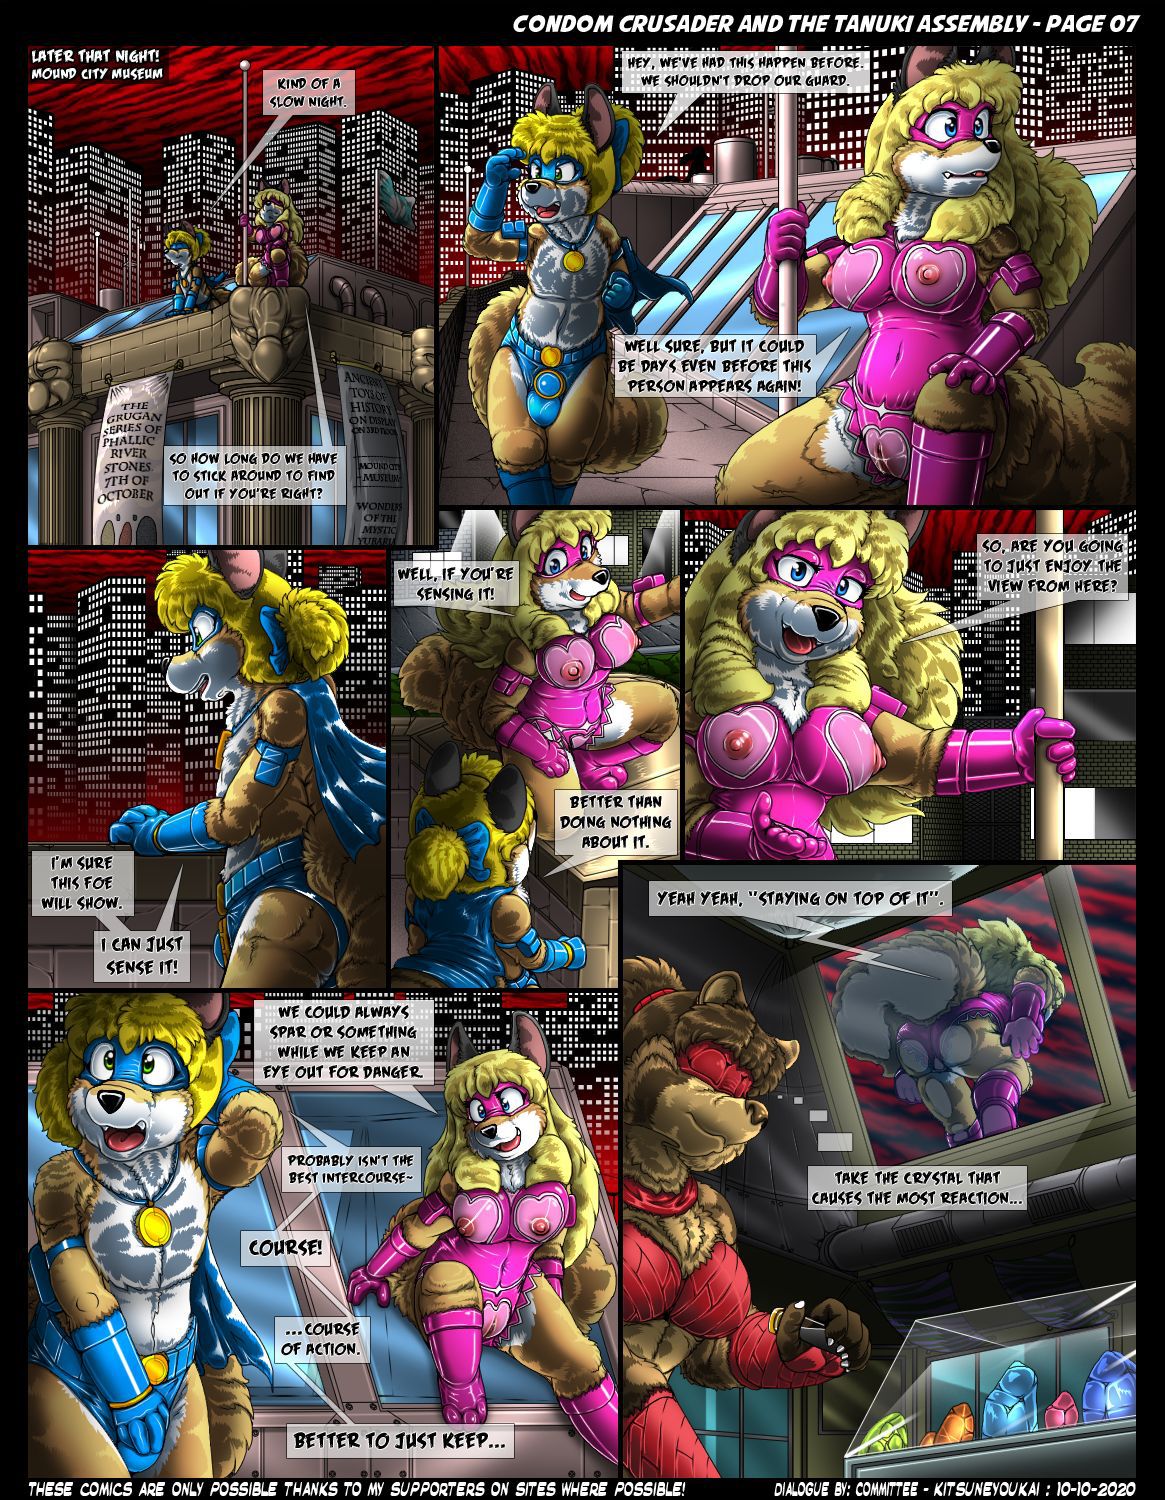 Condom Crusader and the Tanuki Assembly by Kitsune Youkai (Ongoing) 7